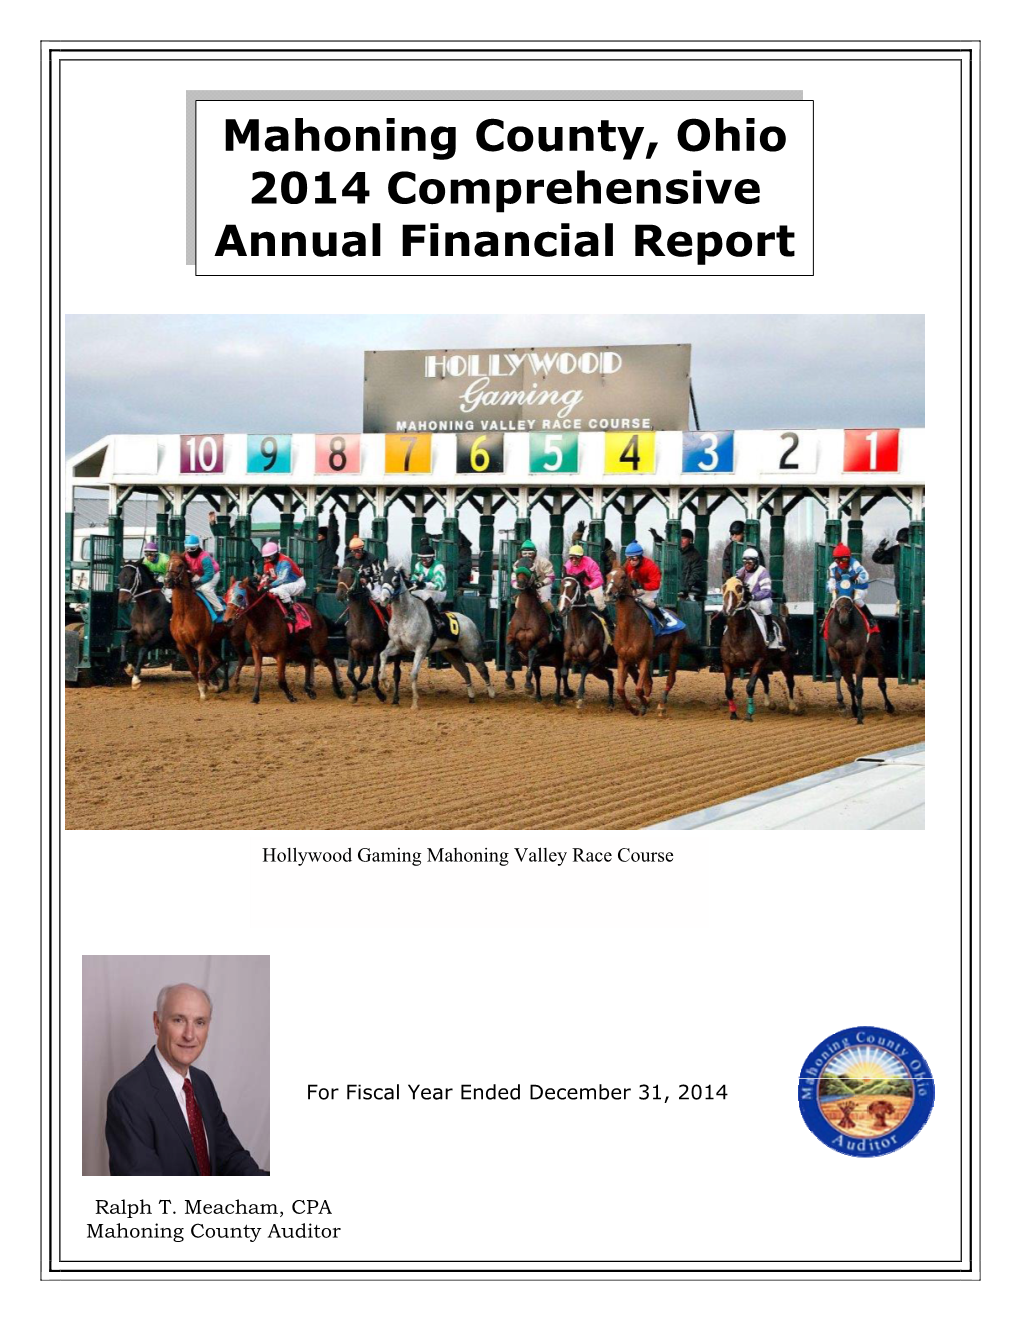 Mahoning County, Ohio 2014 Comprehensive Annual Financial